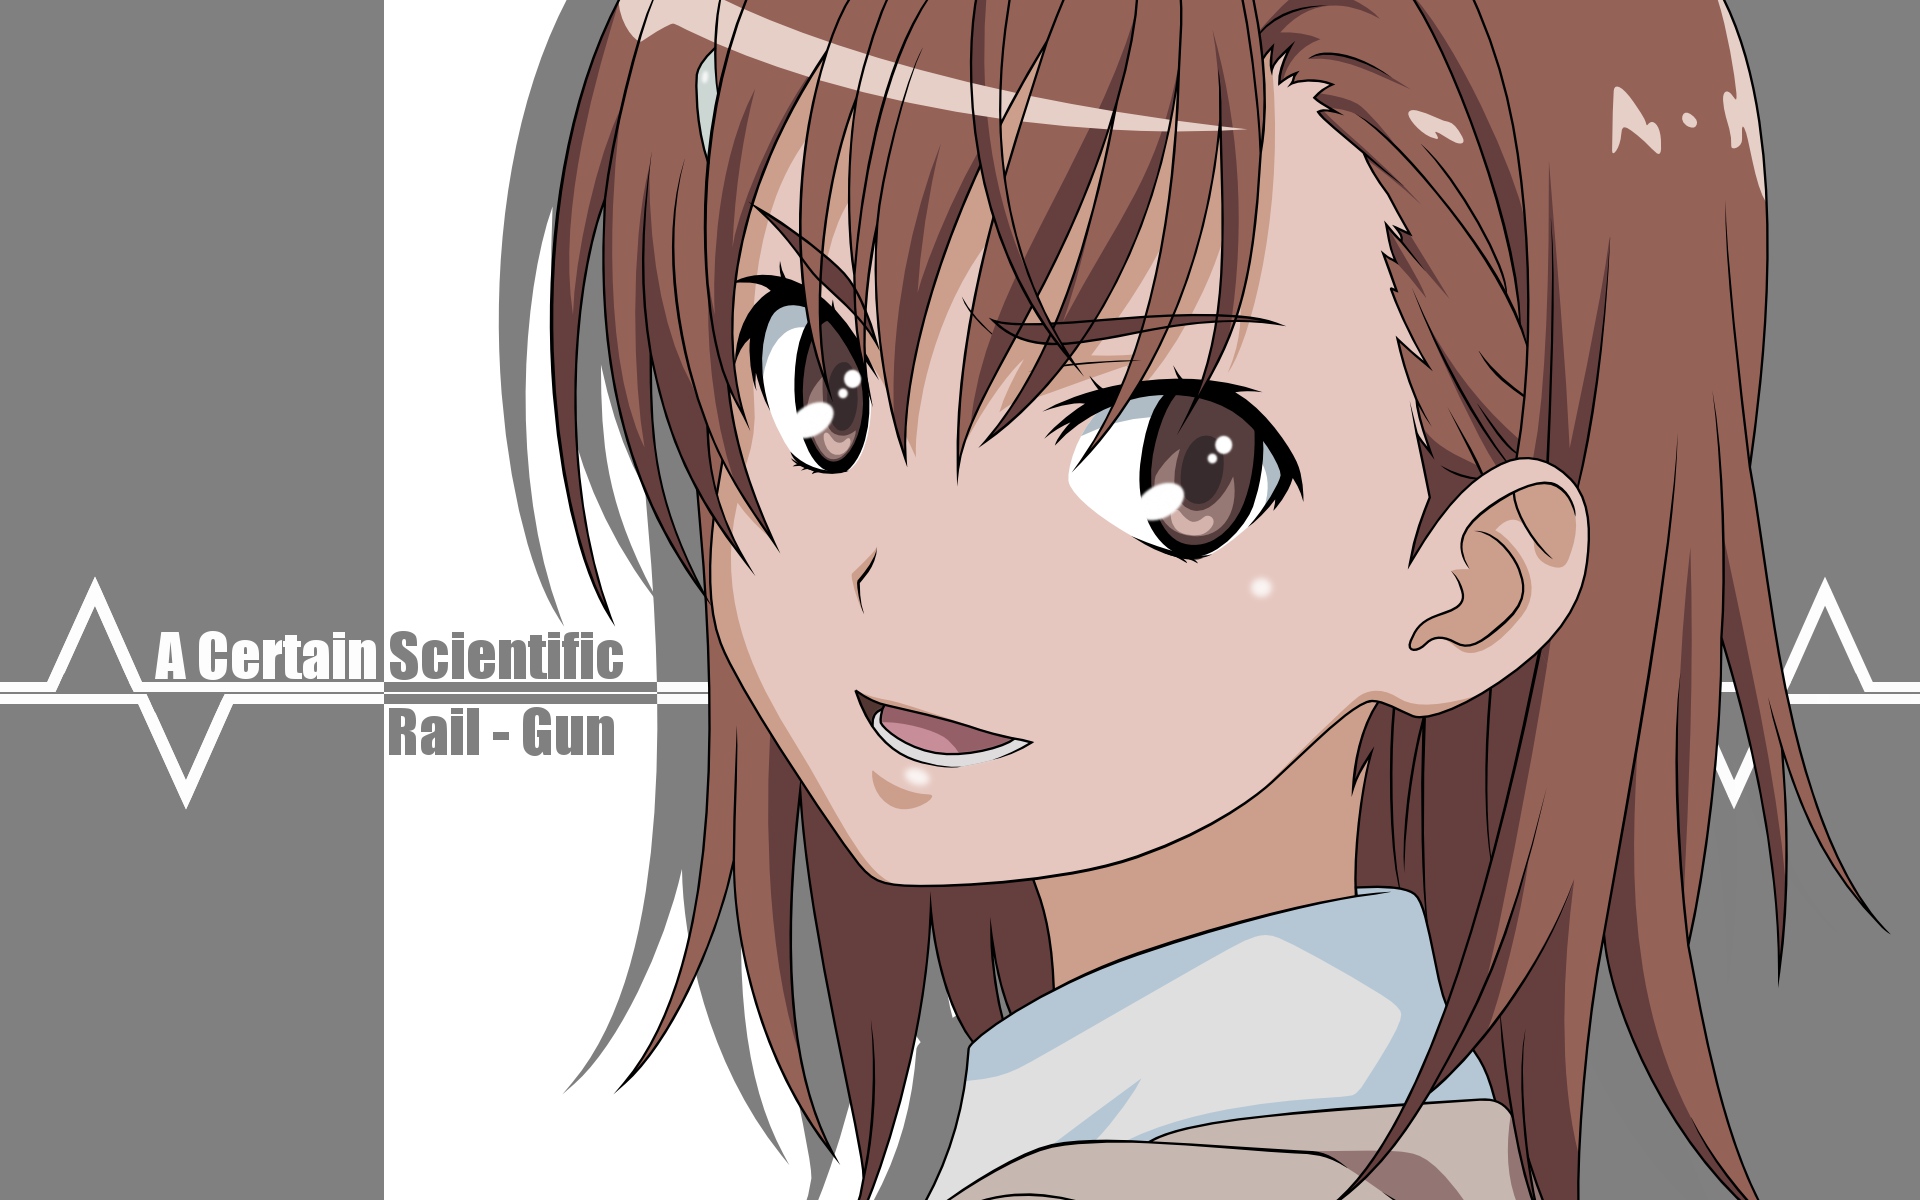 A colorful desktop wallpaper featuring characters from A Certain Scientific Railgun.